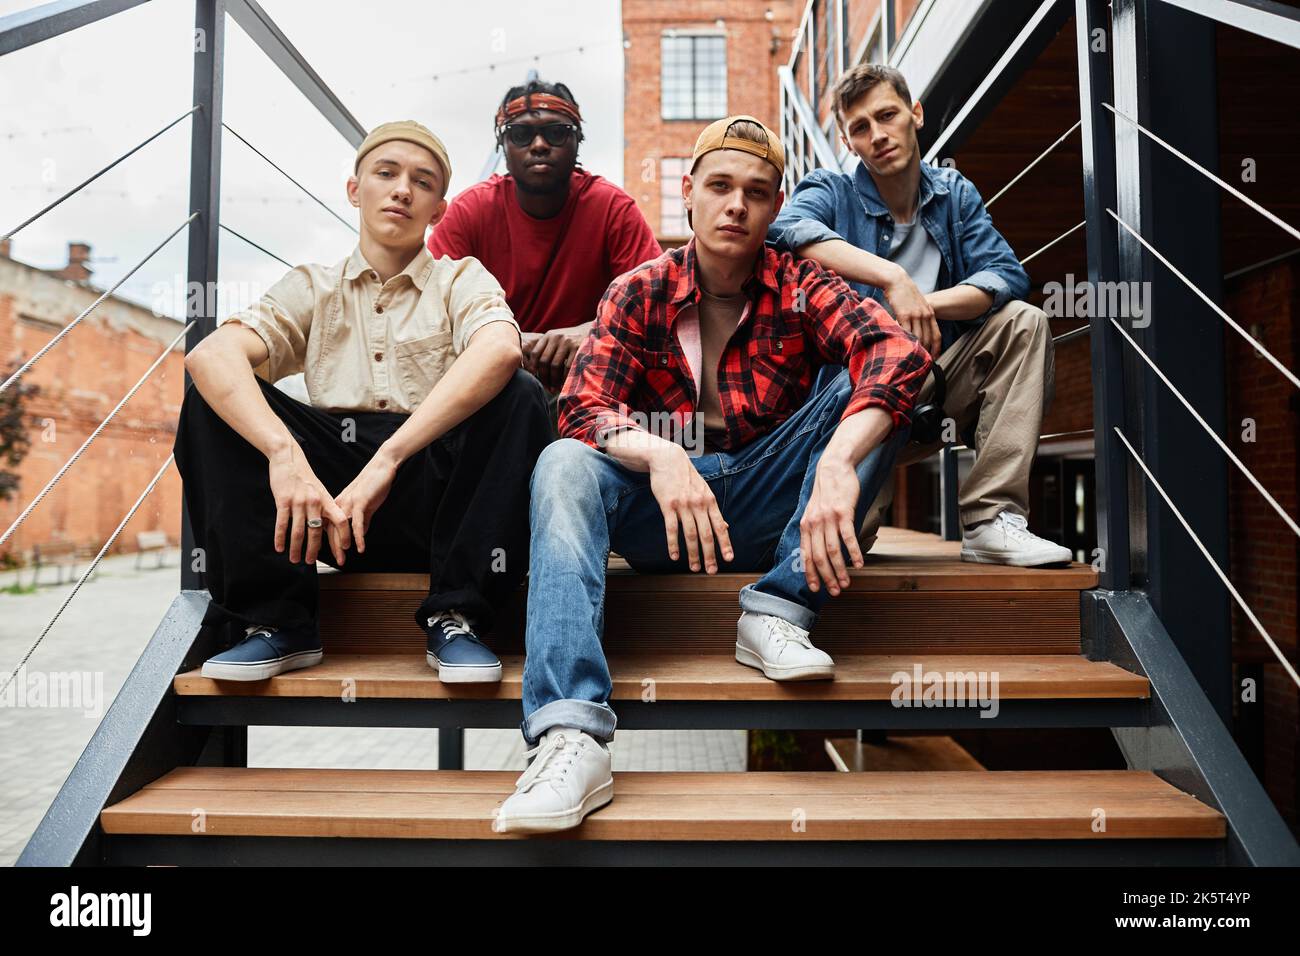 Diverse group of boys wearing street fashion while posing on metal stairs in urban setting Stock Photo